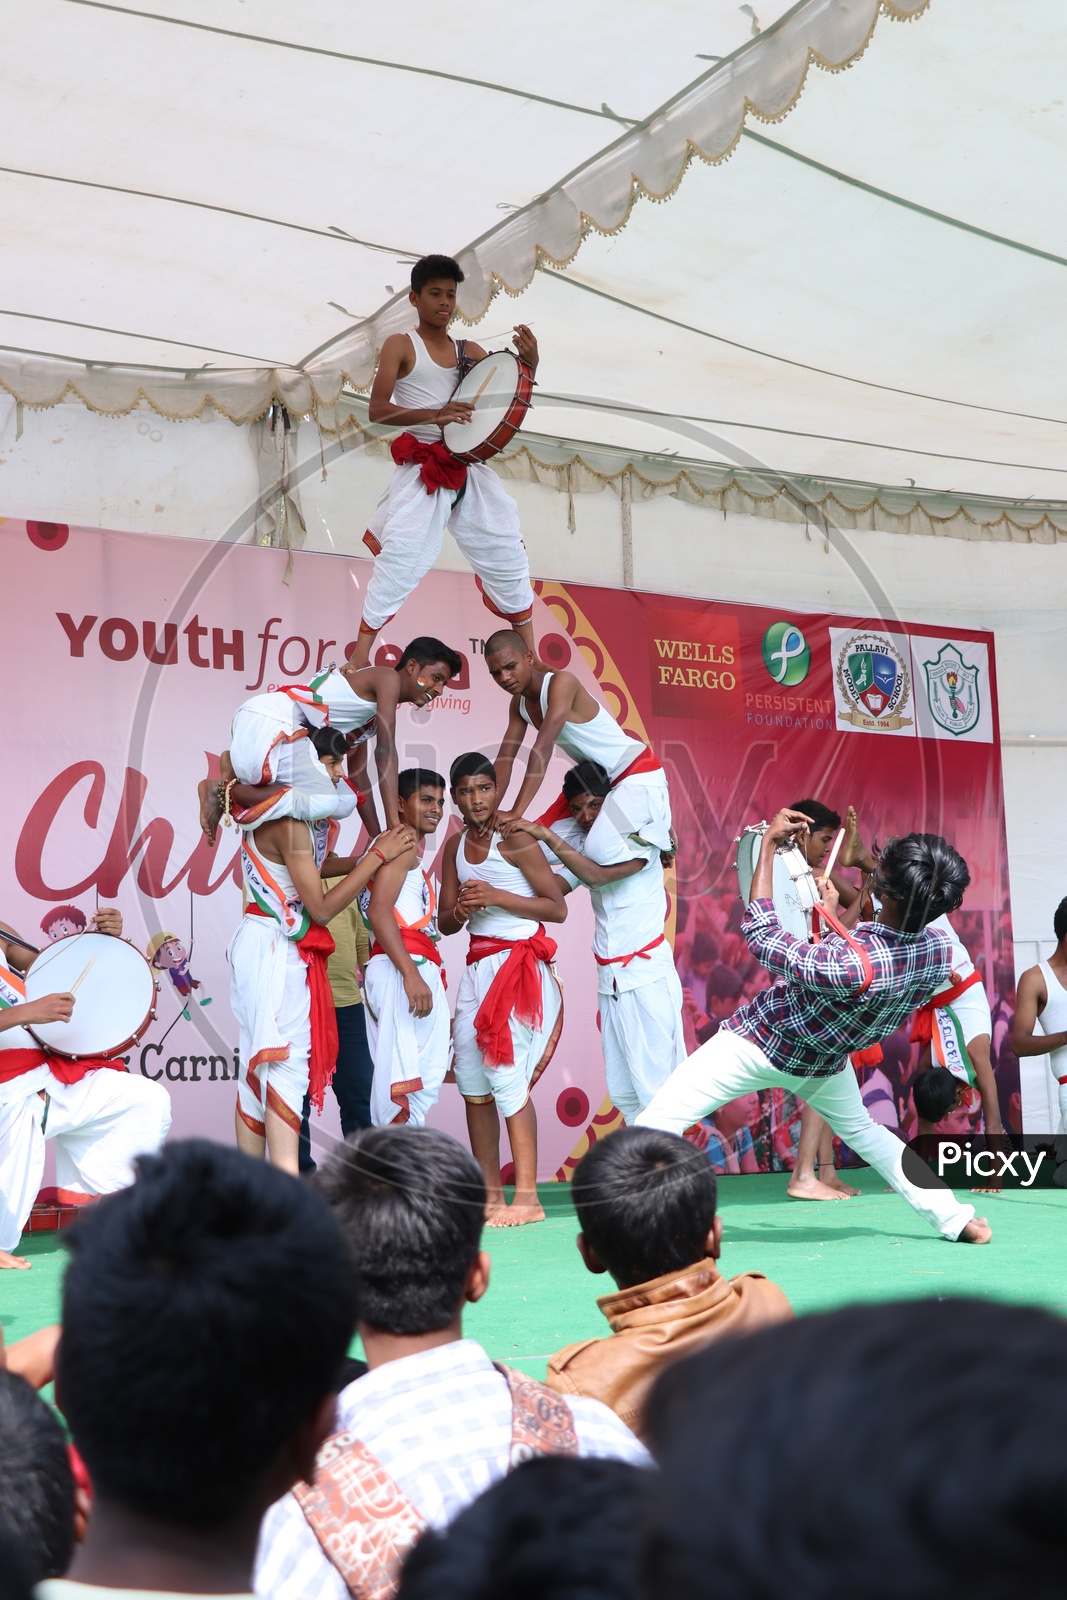 Indian Young  School Children or Students  Performing With Traditional Folk Drums On Stage In an Event